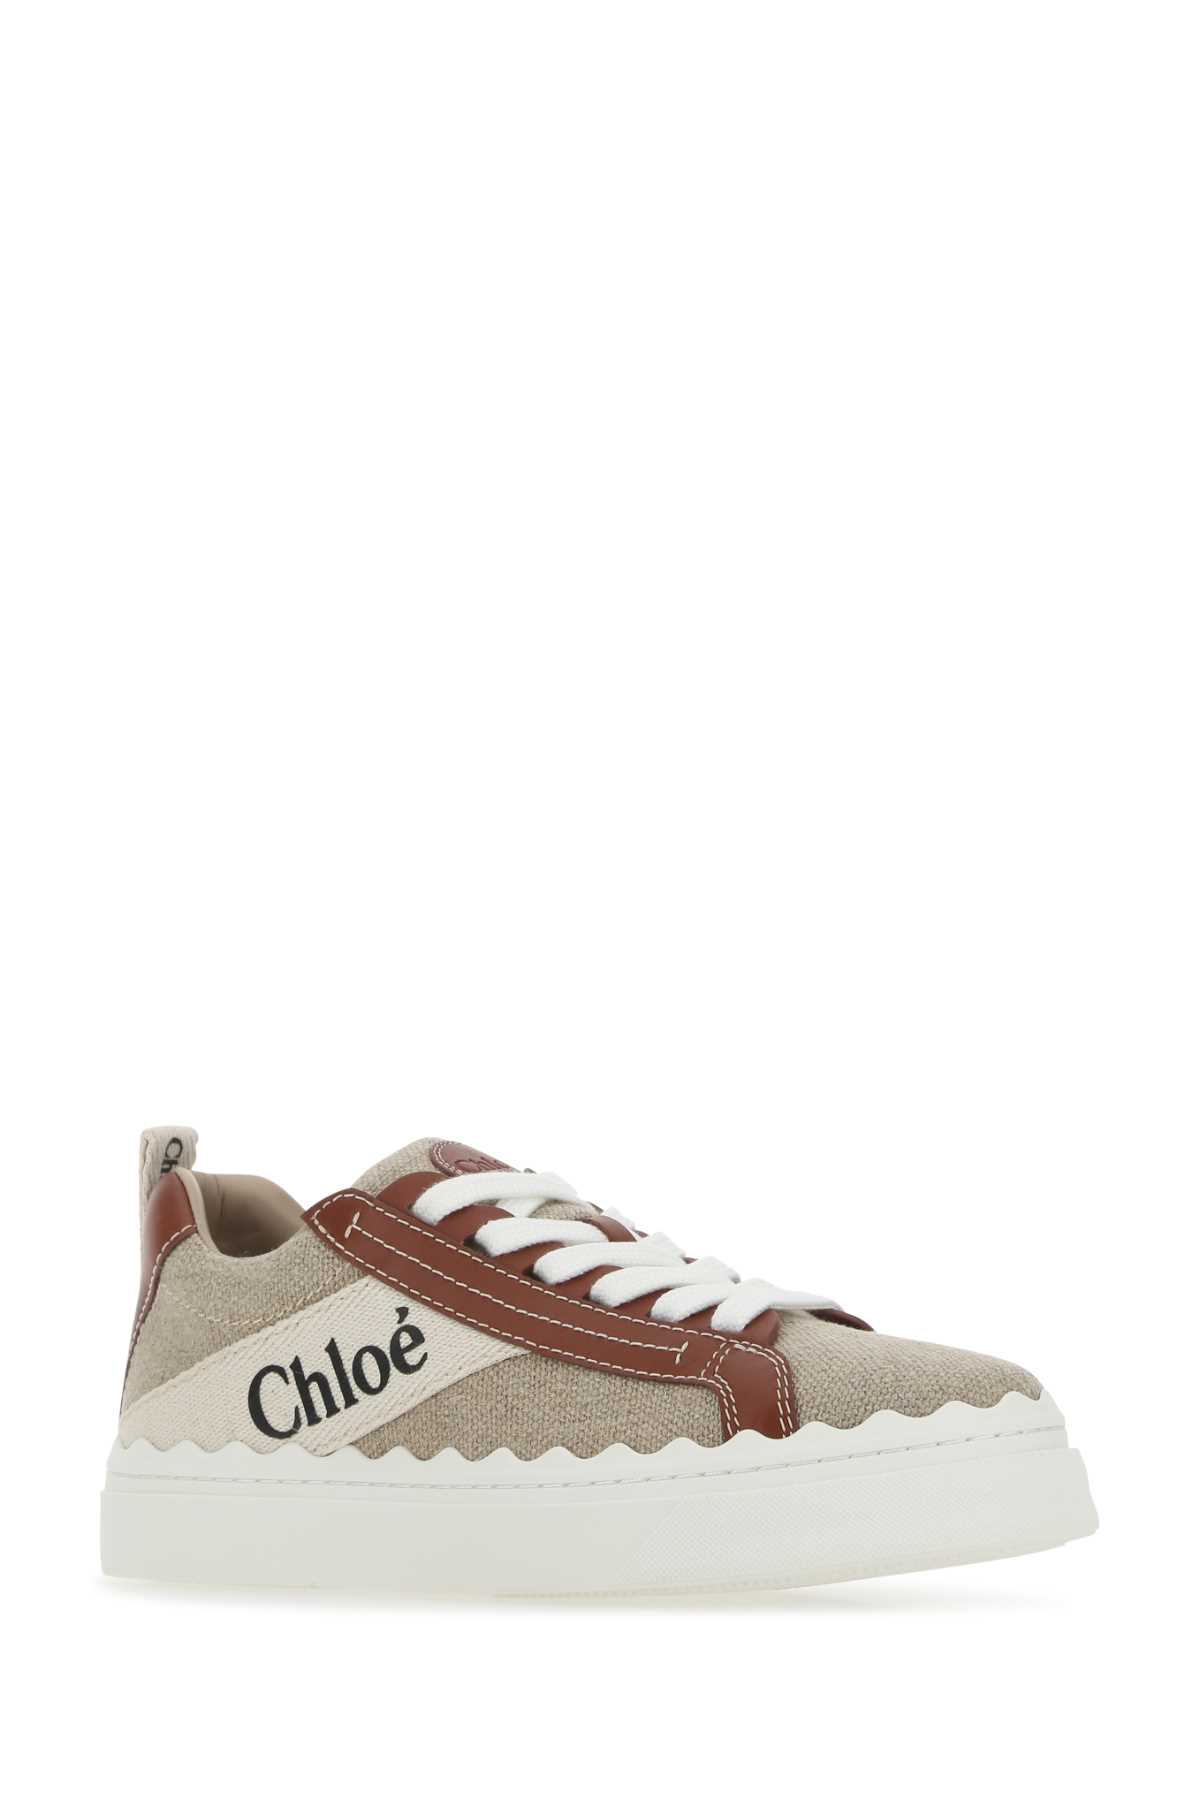 CHLOÉ MULTICOLOR FABRIC AND LEATHER LAUREN SNEAKERS